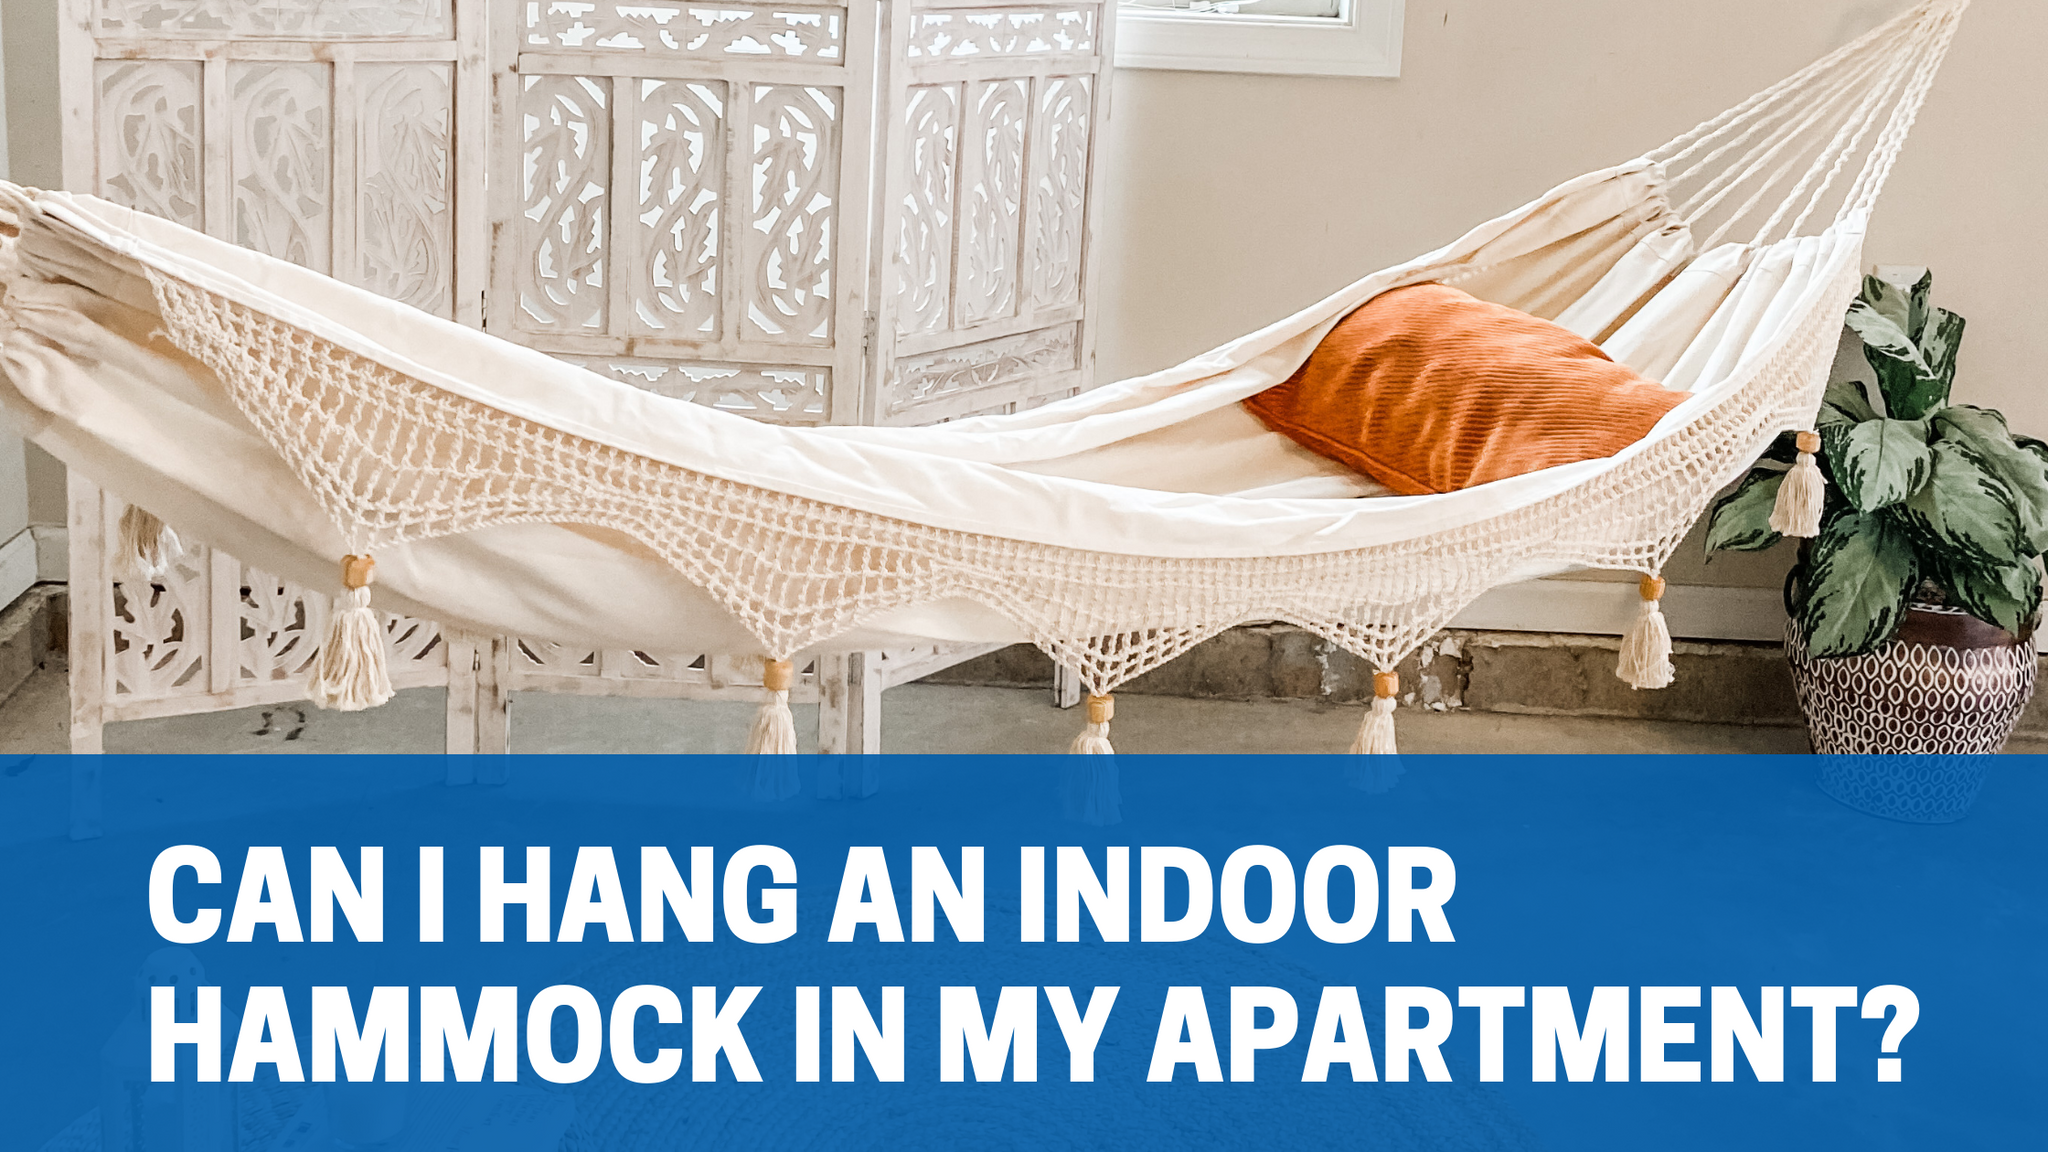 Can you hang an indoor hammock in an apartment?